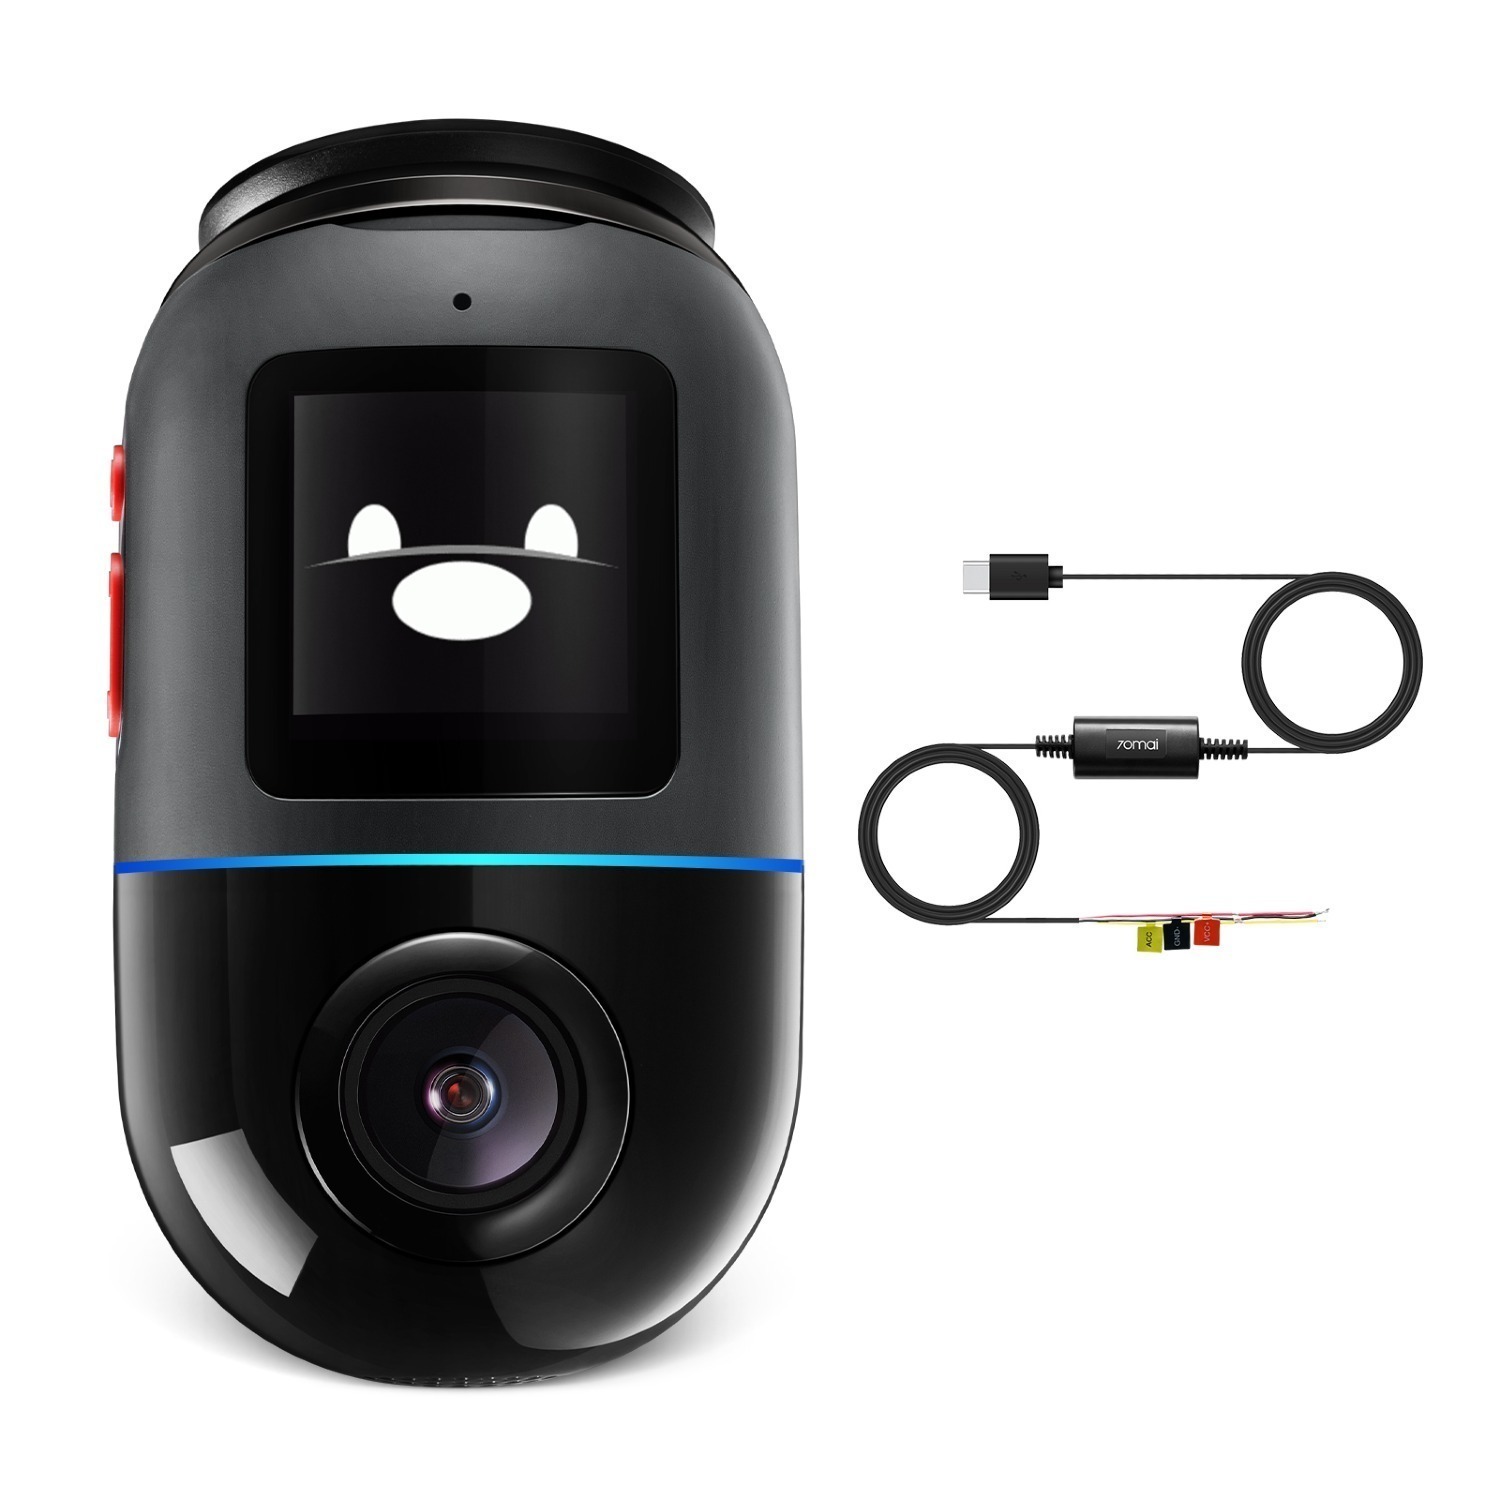 70mai Official Store: 360° Full-view Dash Cam Omni + Hardwire Kit Set: $110 + Free Shipping